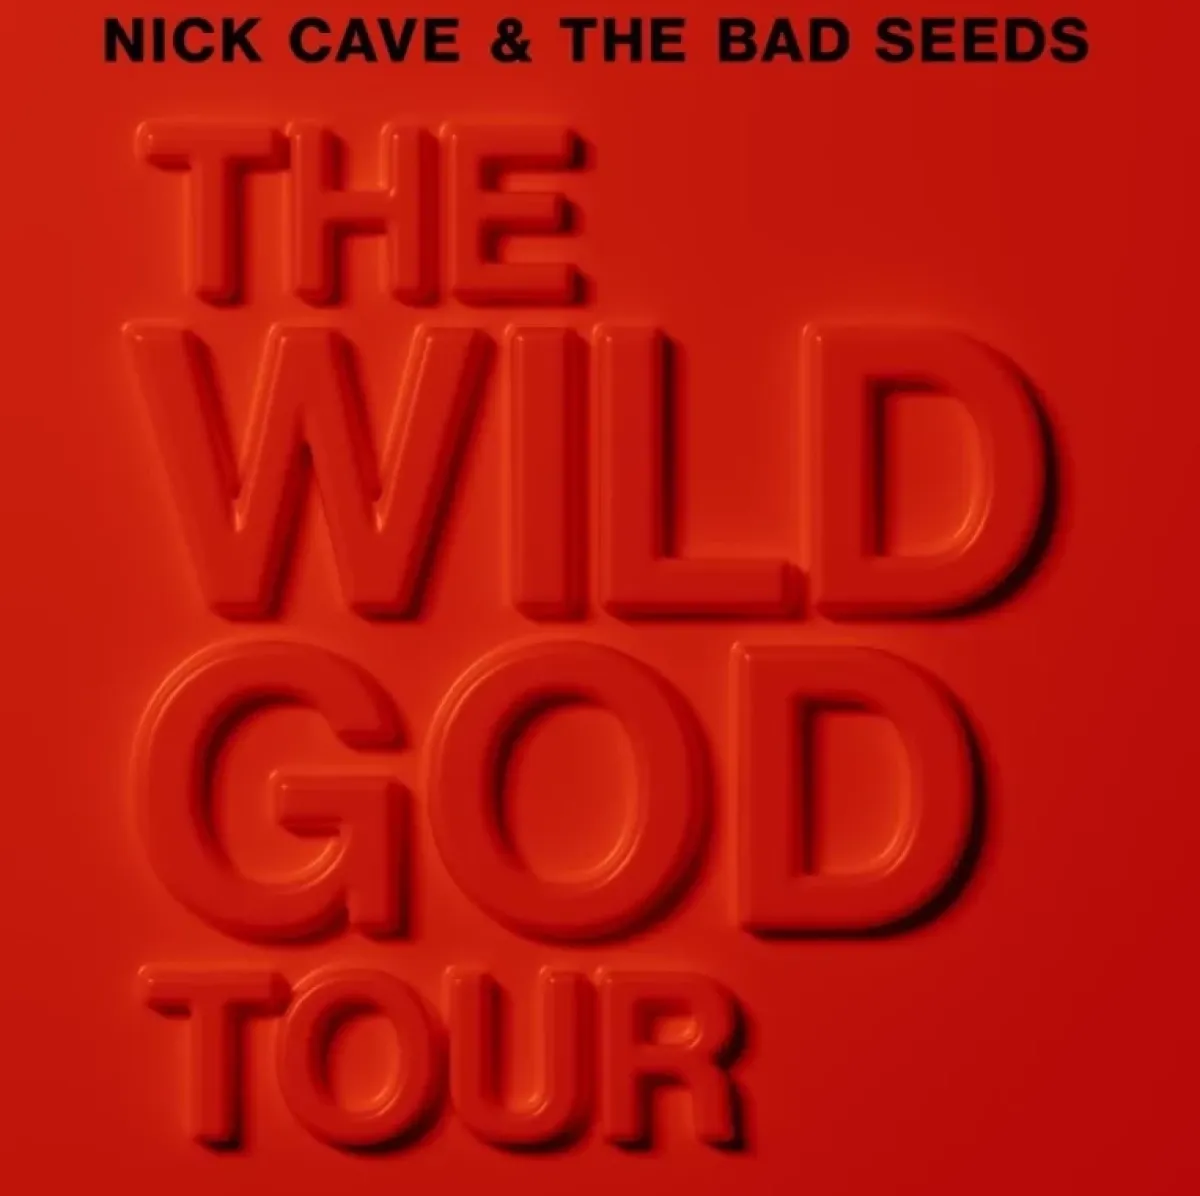 Billets Nick Cave And The Bad Seeds (Manchester AO Arena - Manchester)